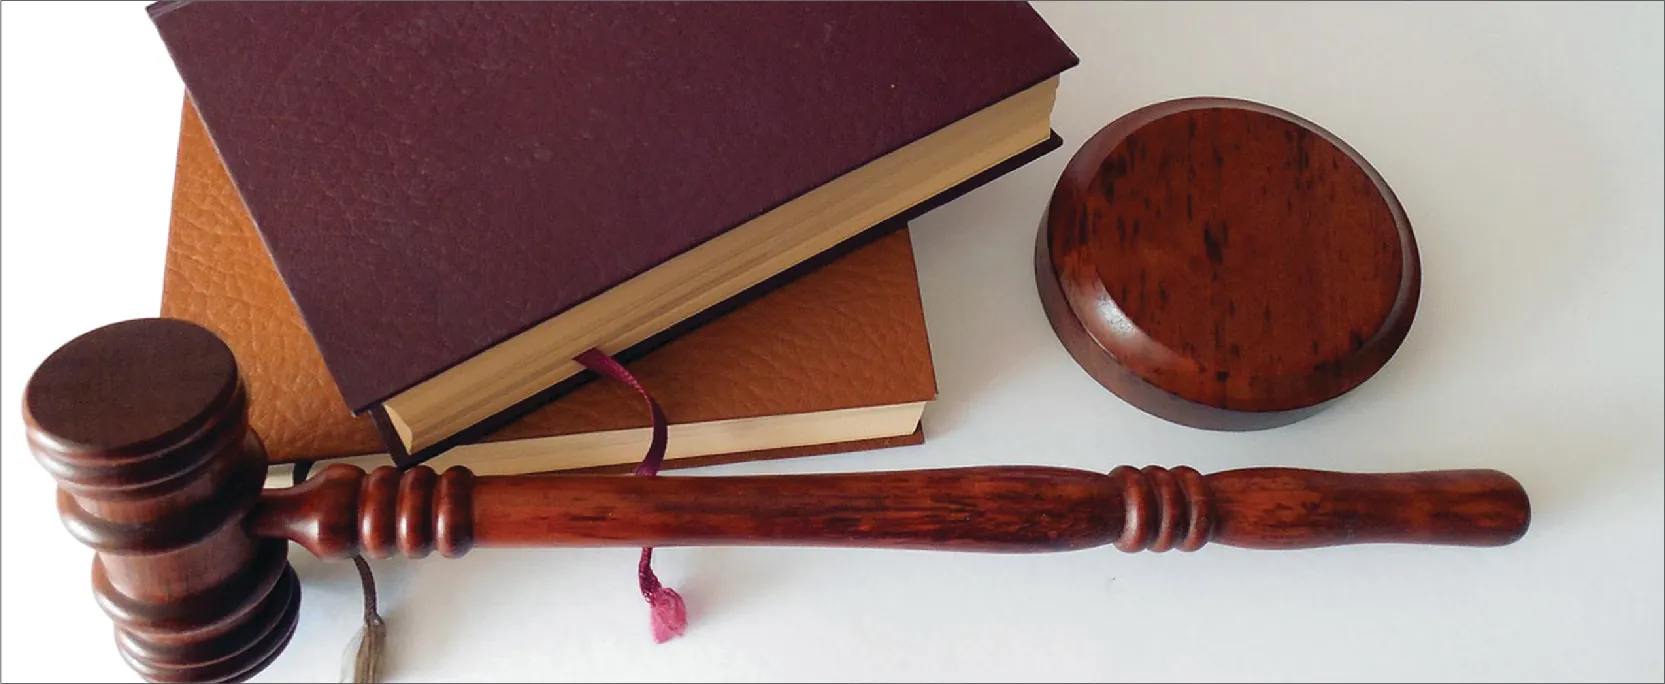 A photo of a gavel and two leather-bound books.